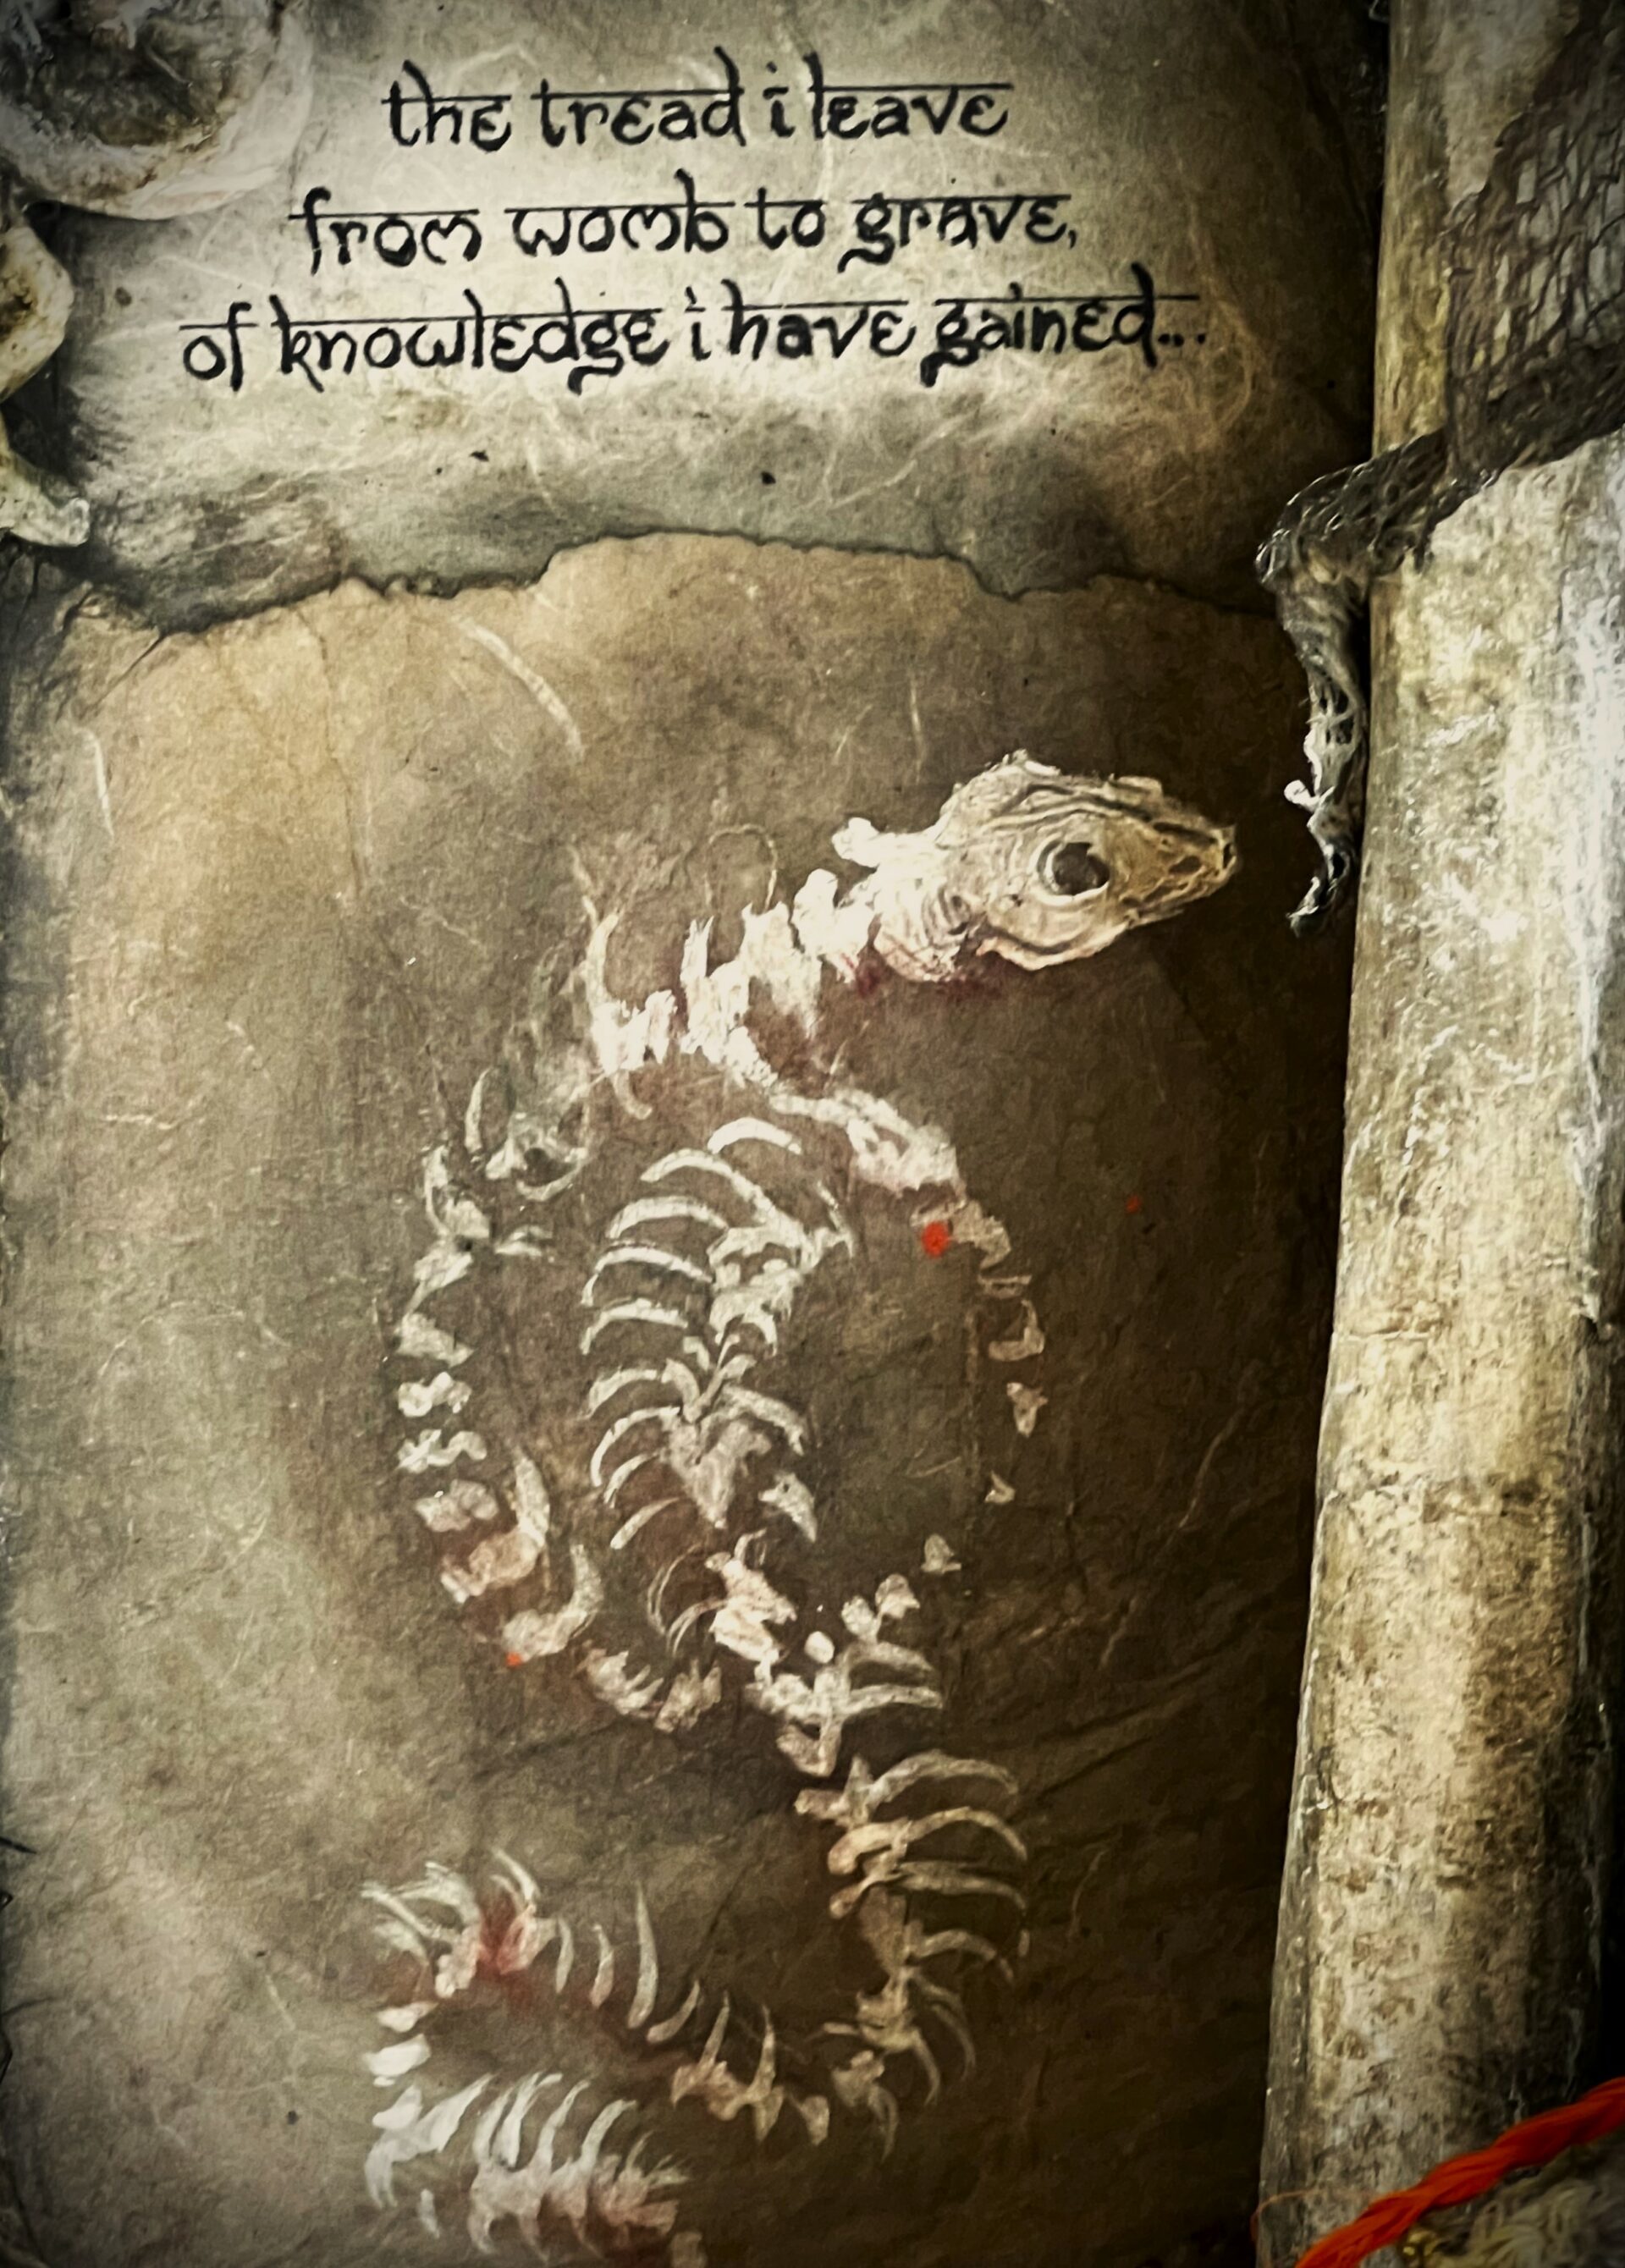 detail of snake skeleton painting with poem above